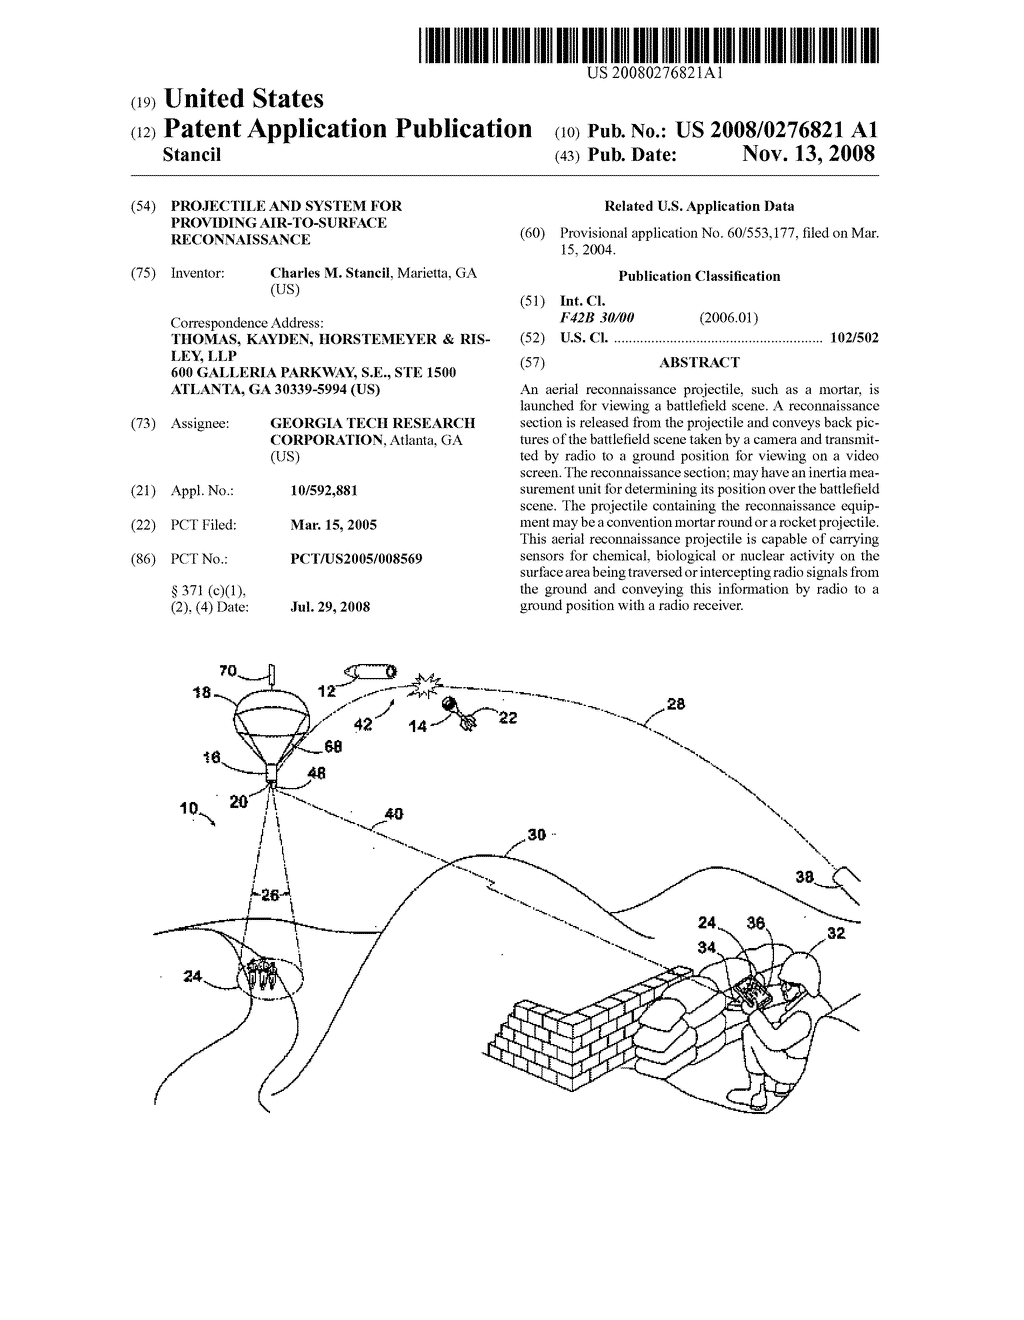 Projectile and System for Providing Air-to-Surface Reconnaissance - diagram, schematic, and image 01